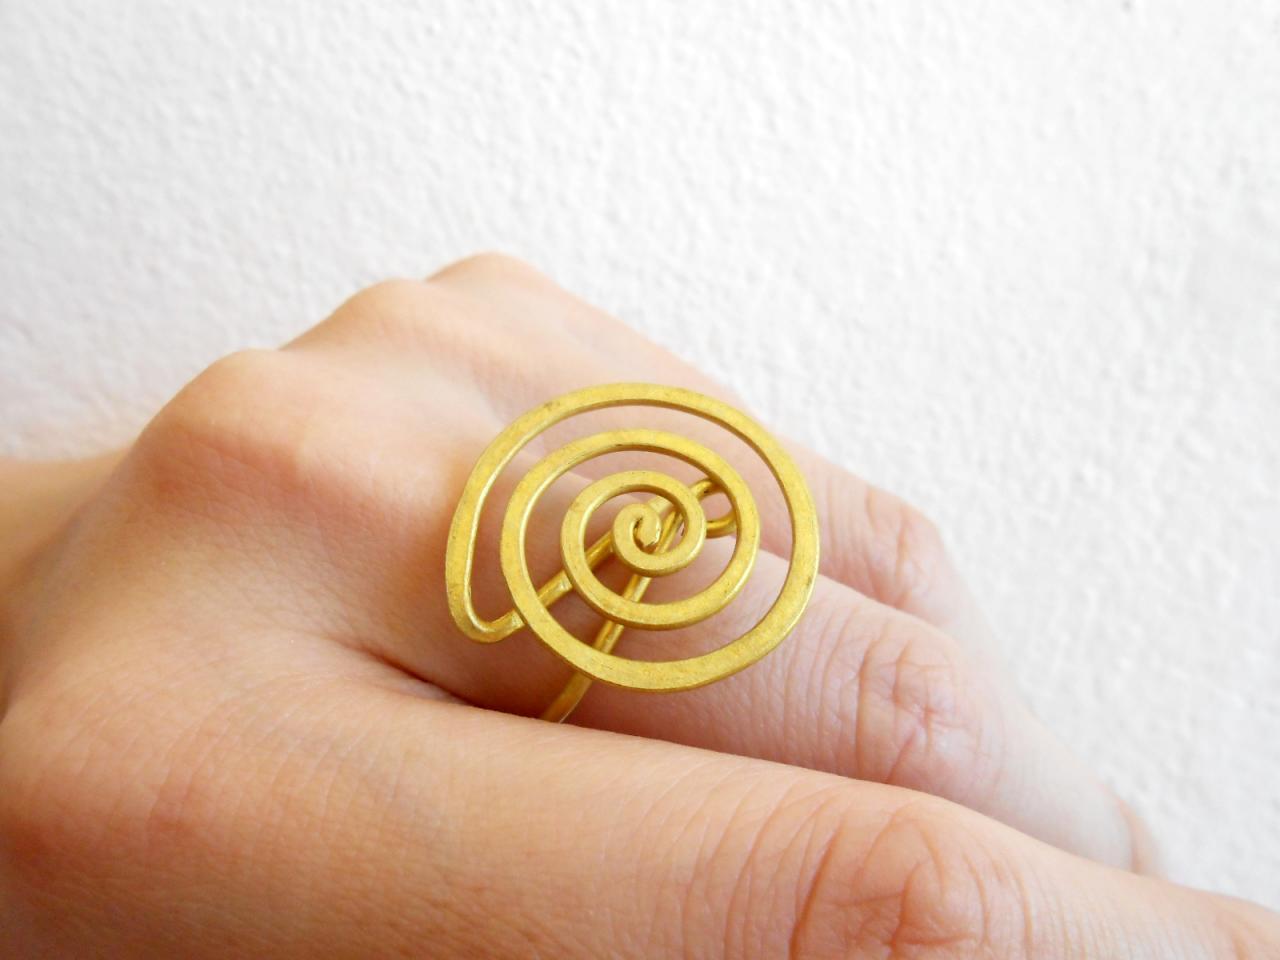 Coil Brass Ring, Fashion Designs - Adjustable Ring, Jewelry Thailand Handmade. Jr1011